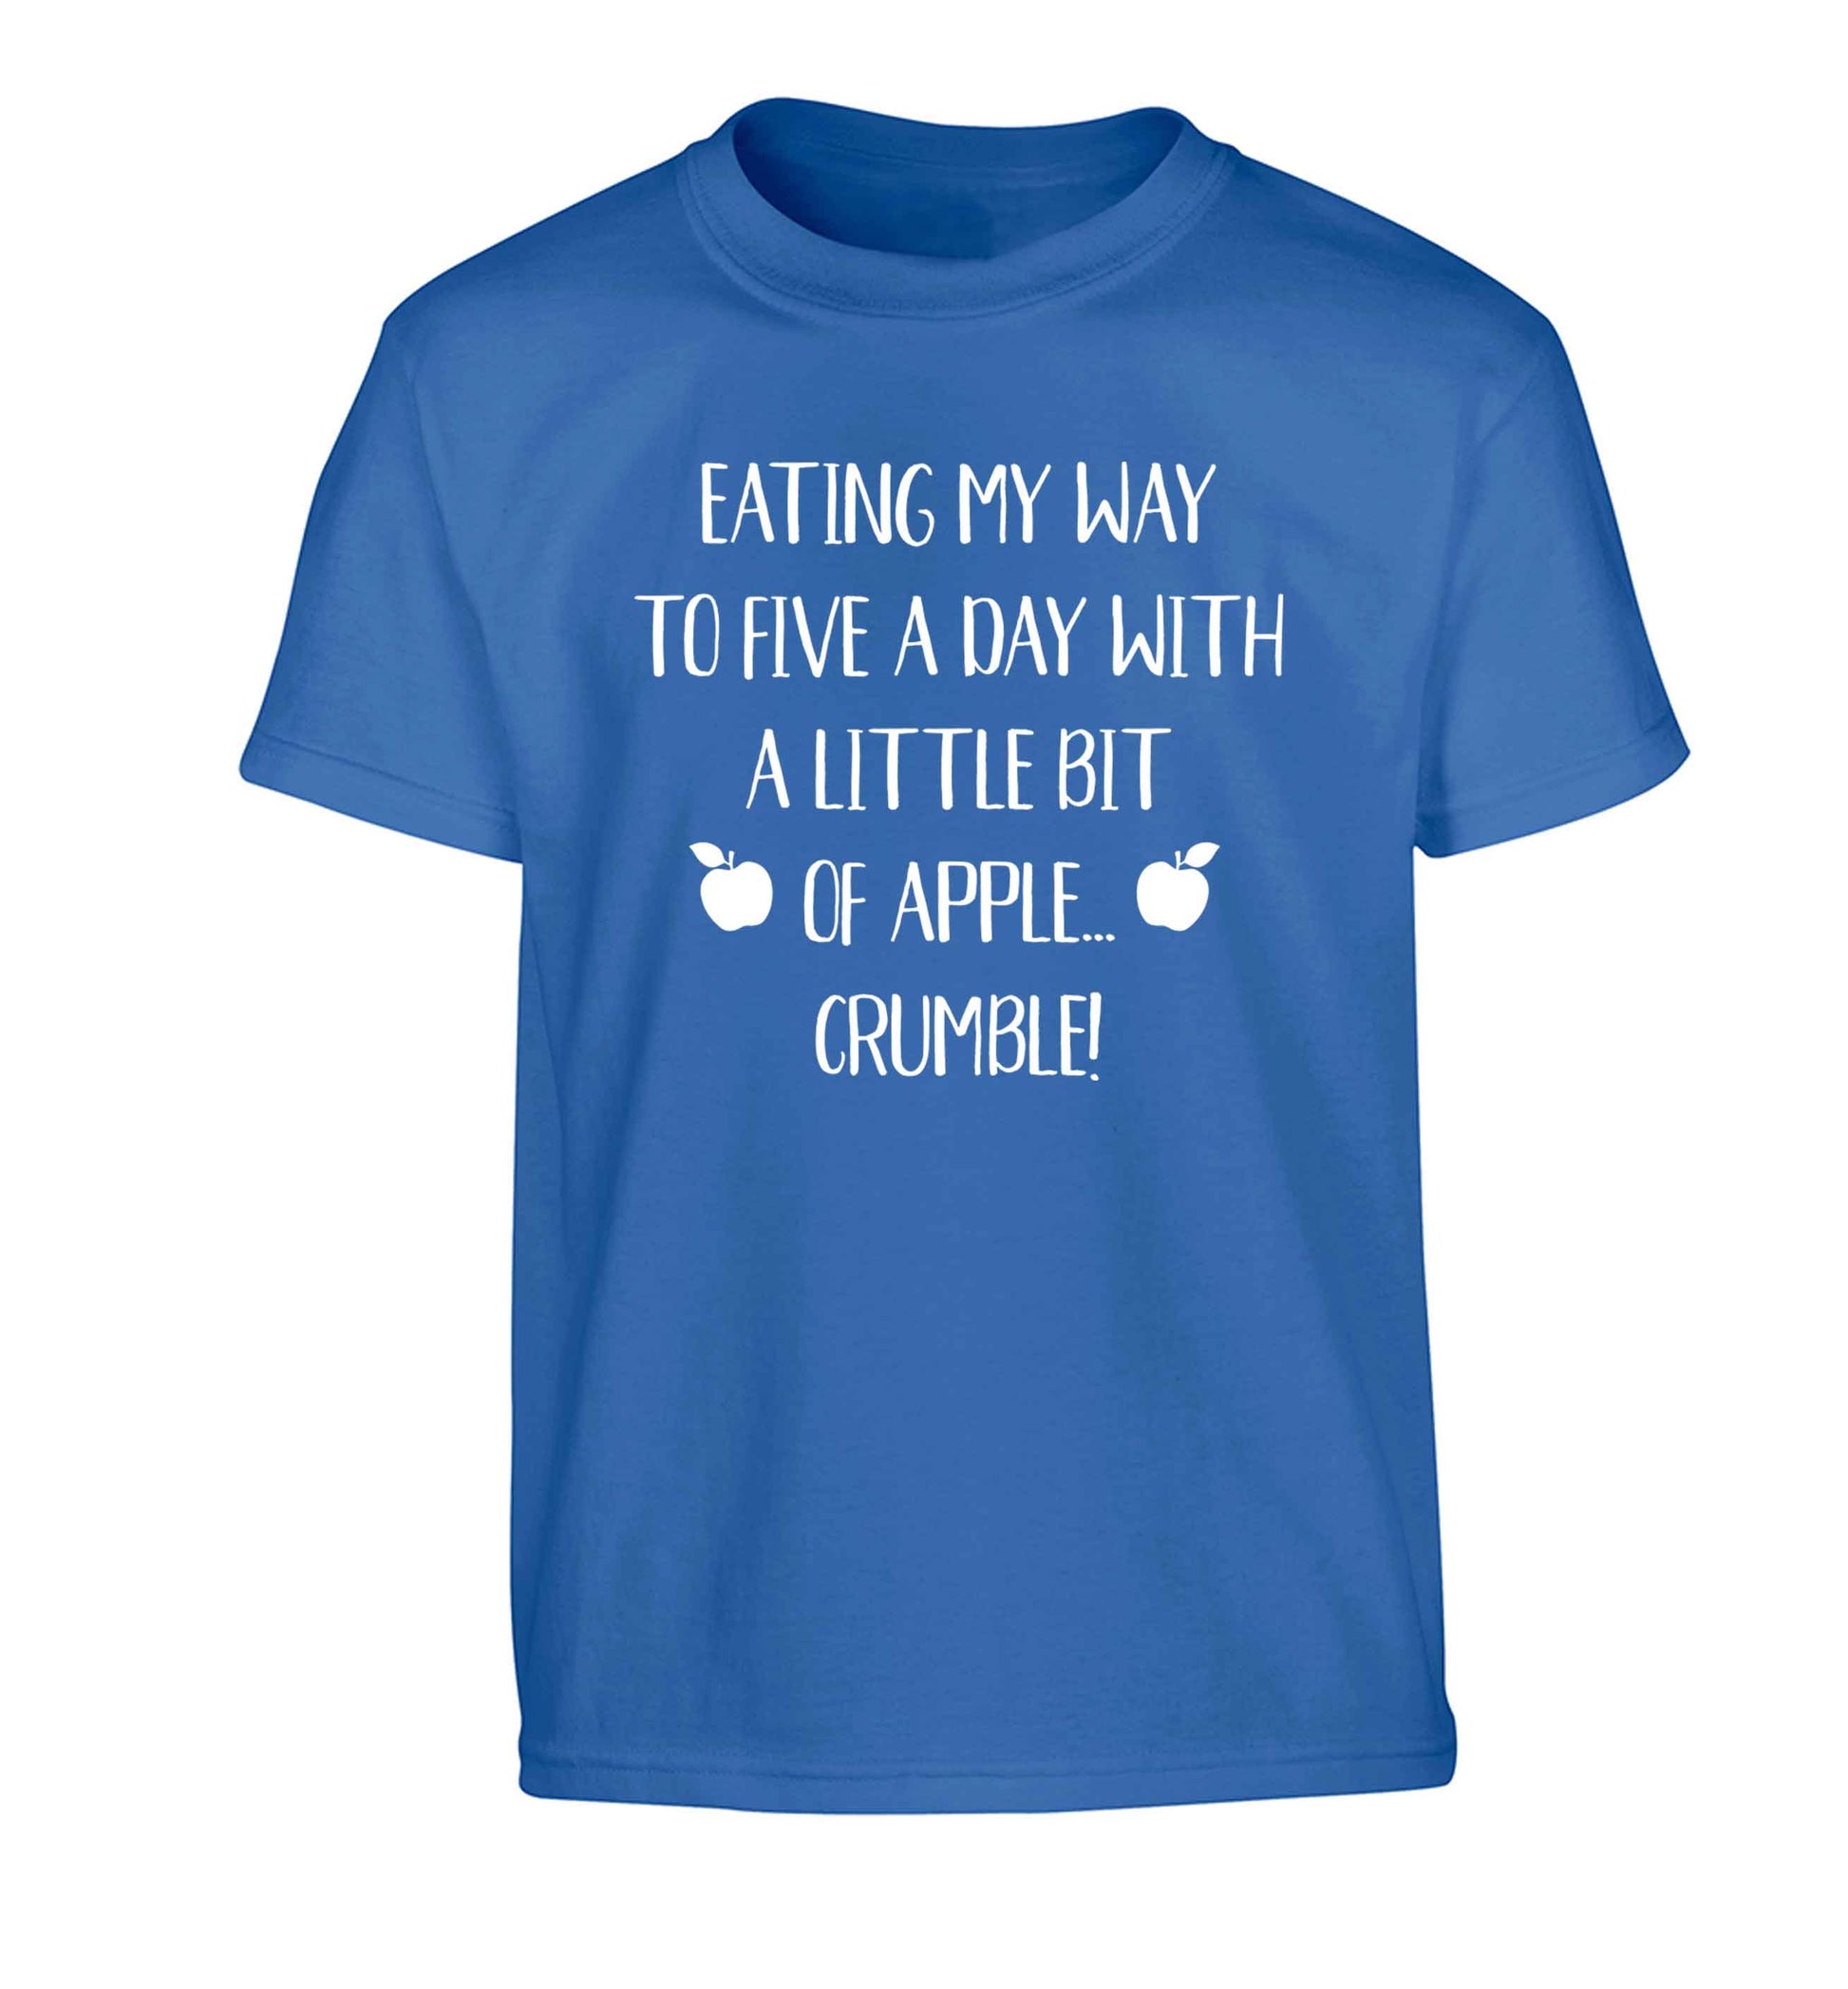 Eating my way to five a day with a little bit of apple crumble Children's blue Tshirt 12-13 Years